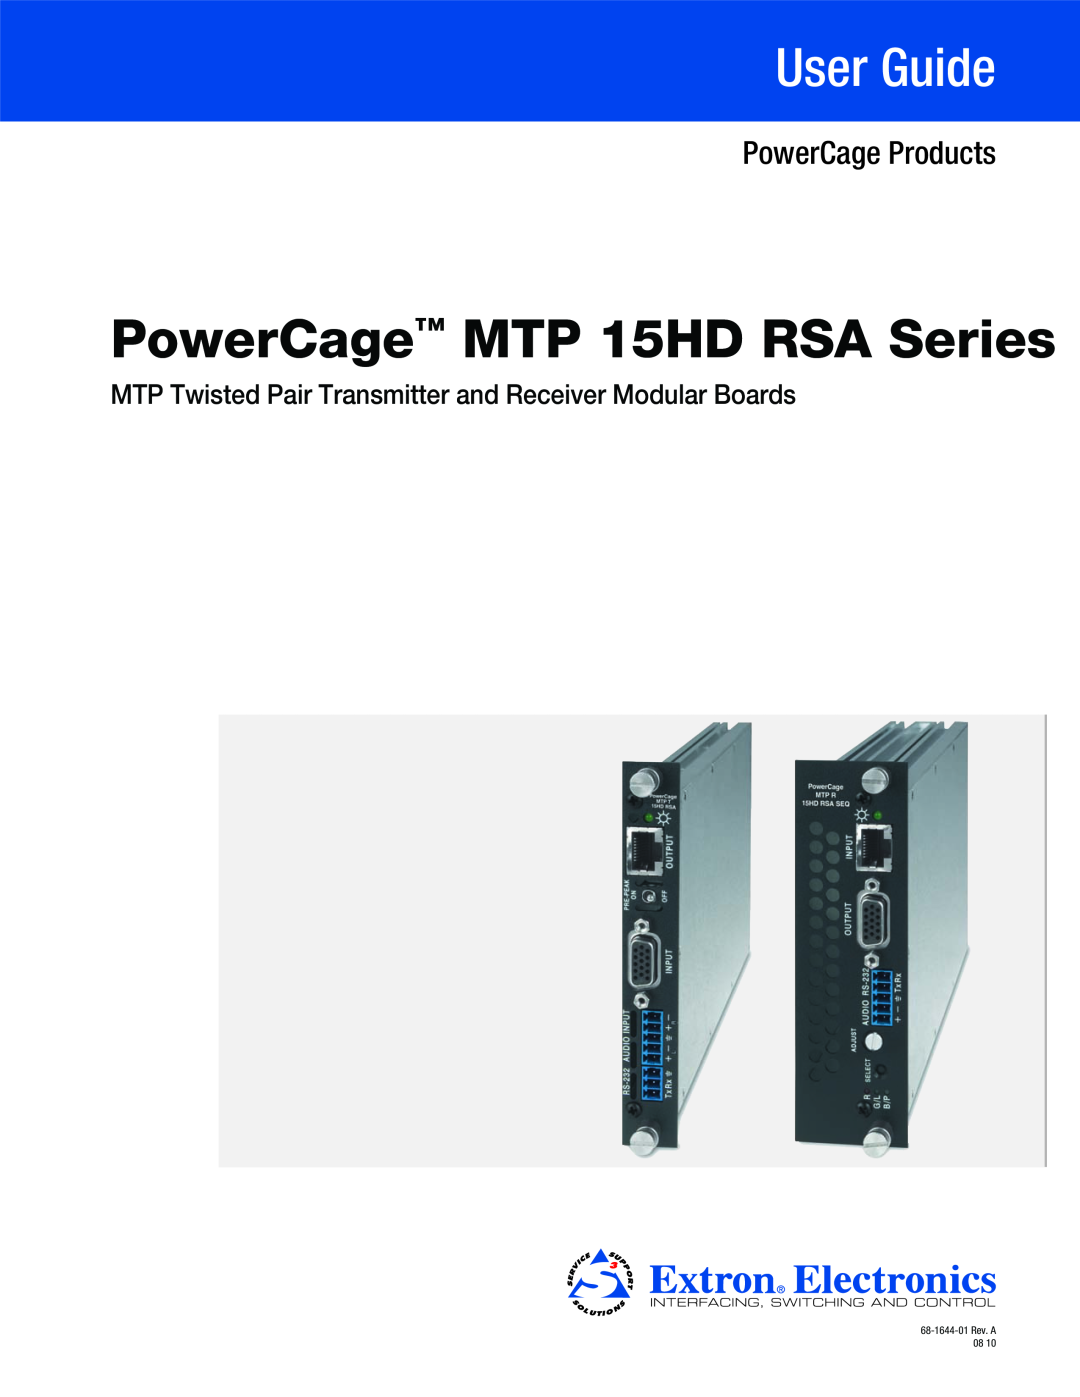 Extron electronic manual PowerCage MTP 15HD RSA Series, User Guide, PowerCage Products, 68-1644-01 Rev. A 